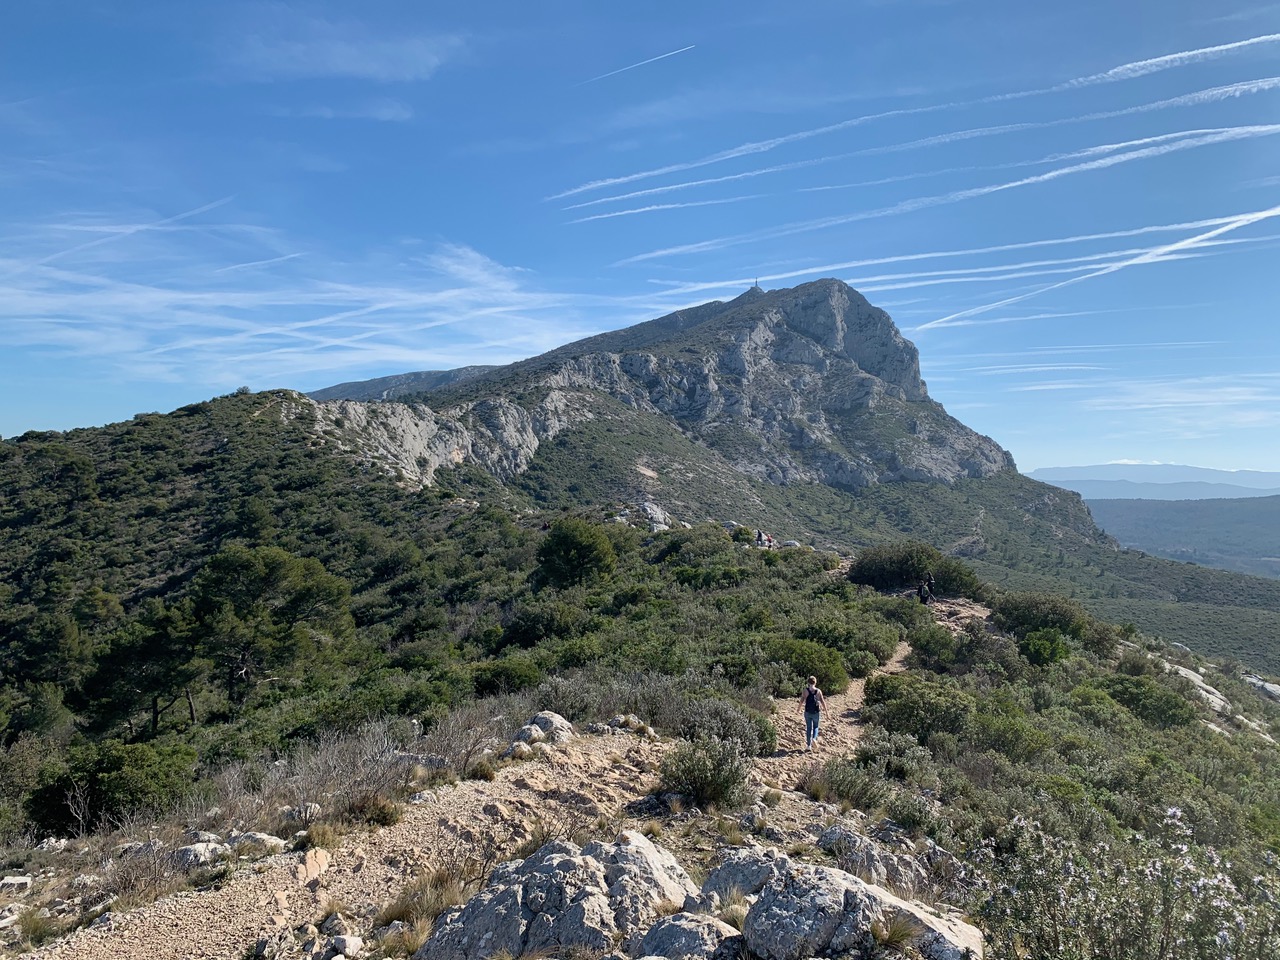 A far away view of Montagne Sainte-Victoire on a blue-sky day